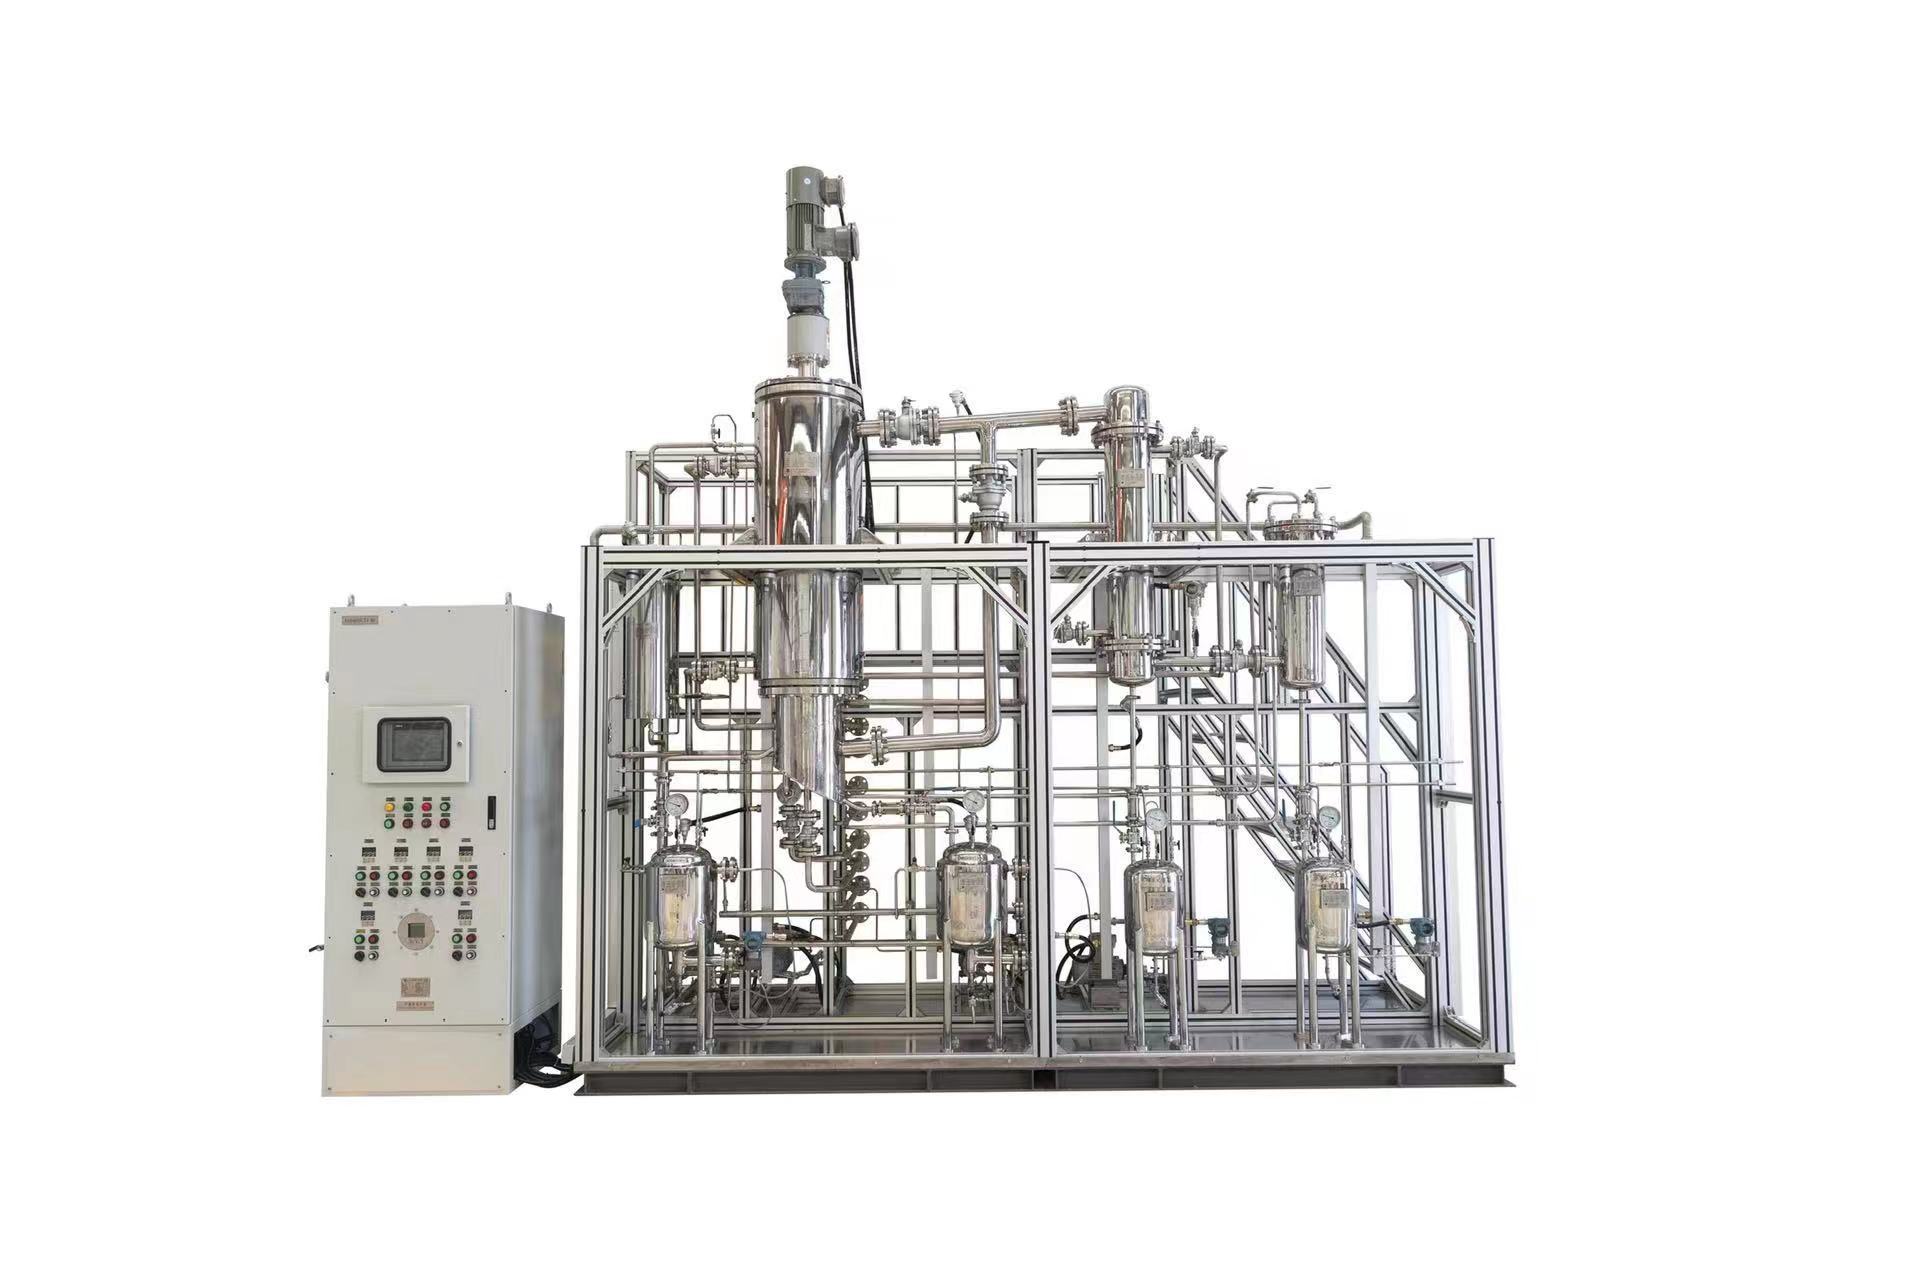 Pilot-scale And Industrial Short-path Distillation Units